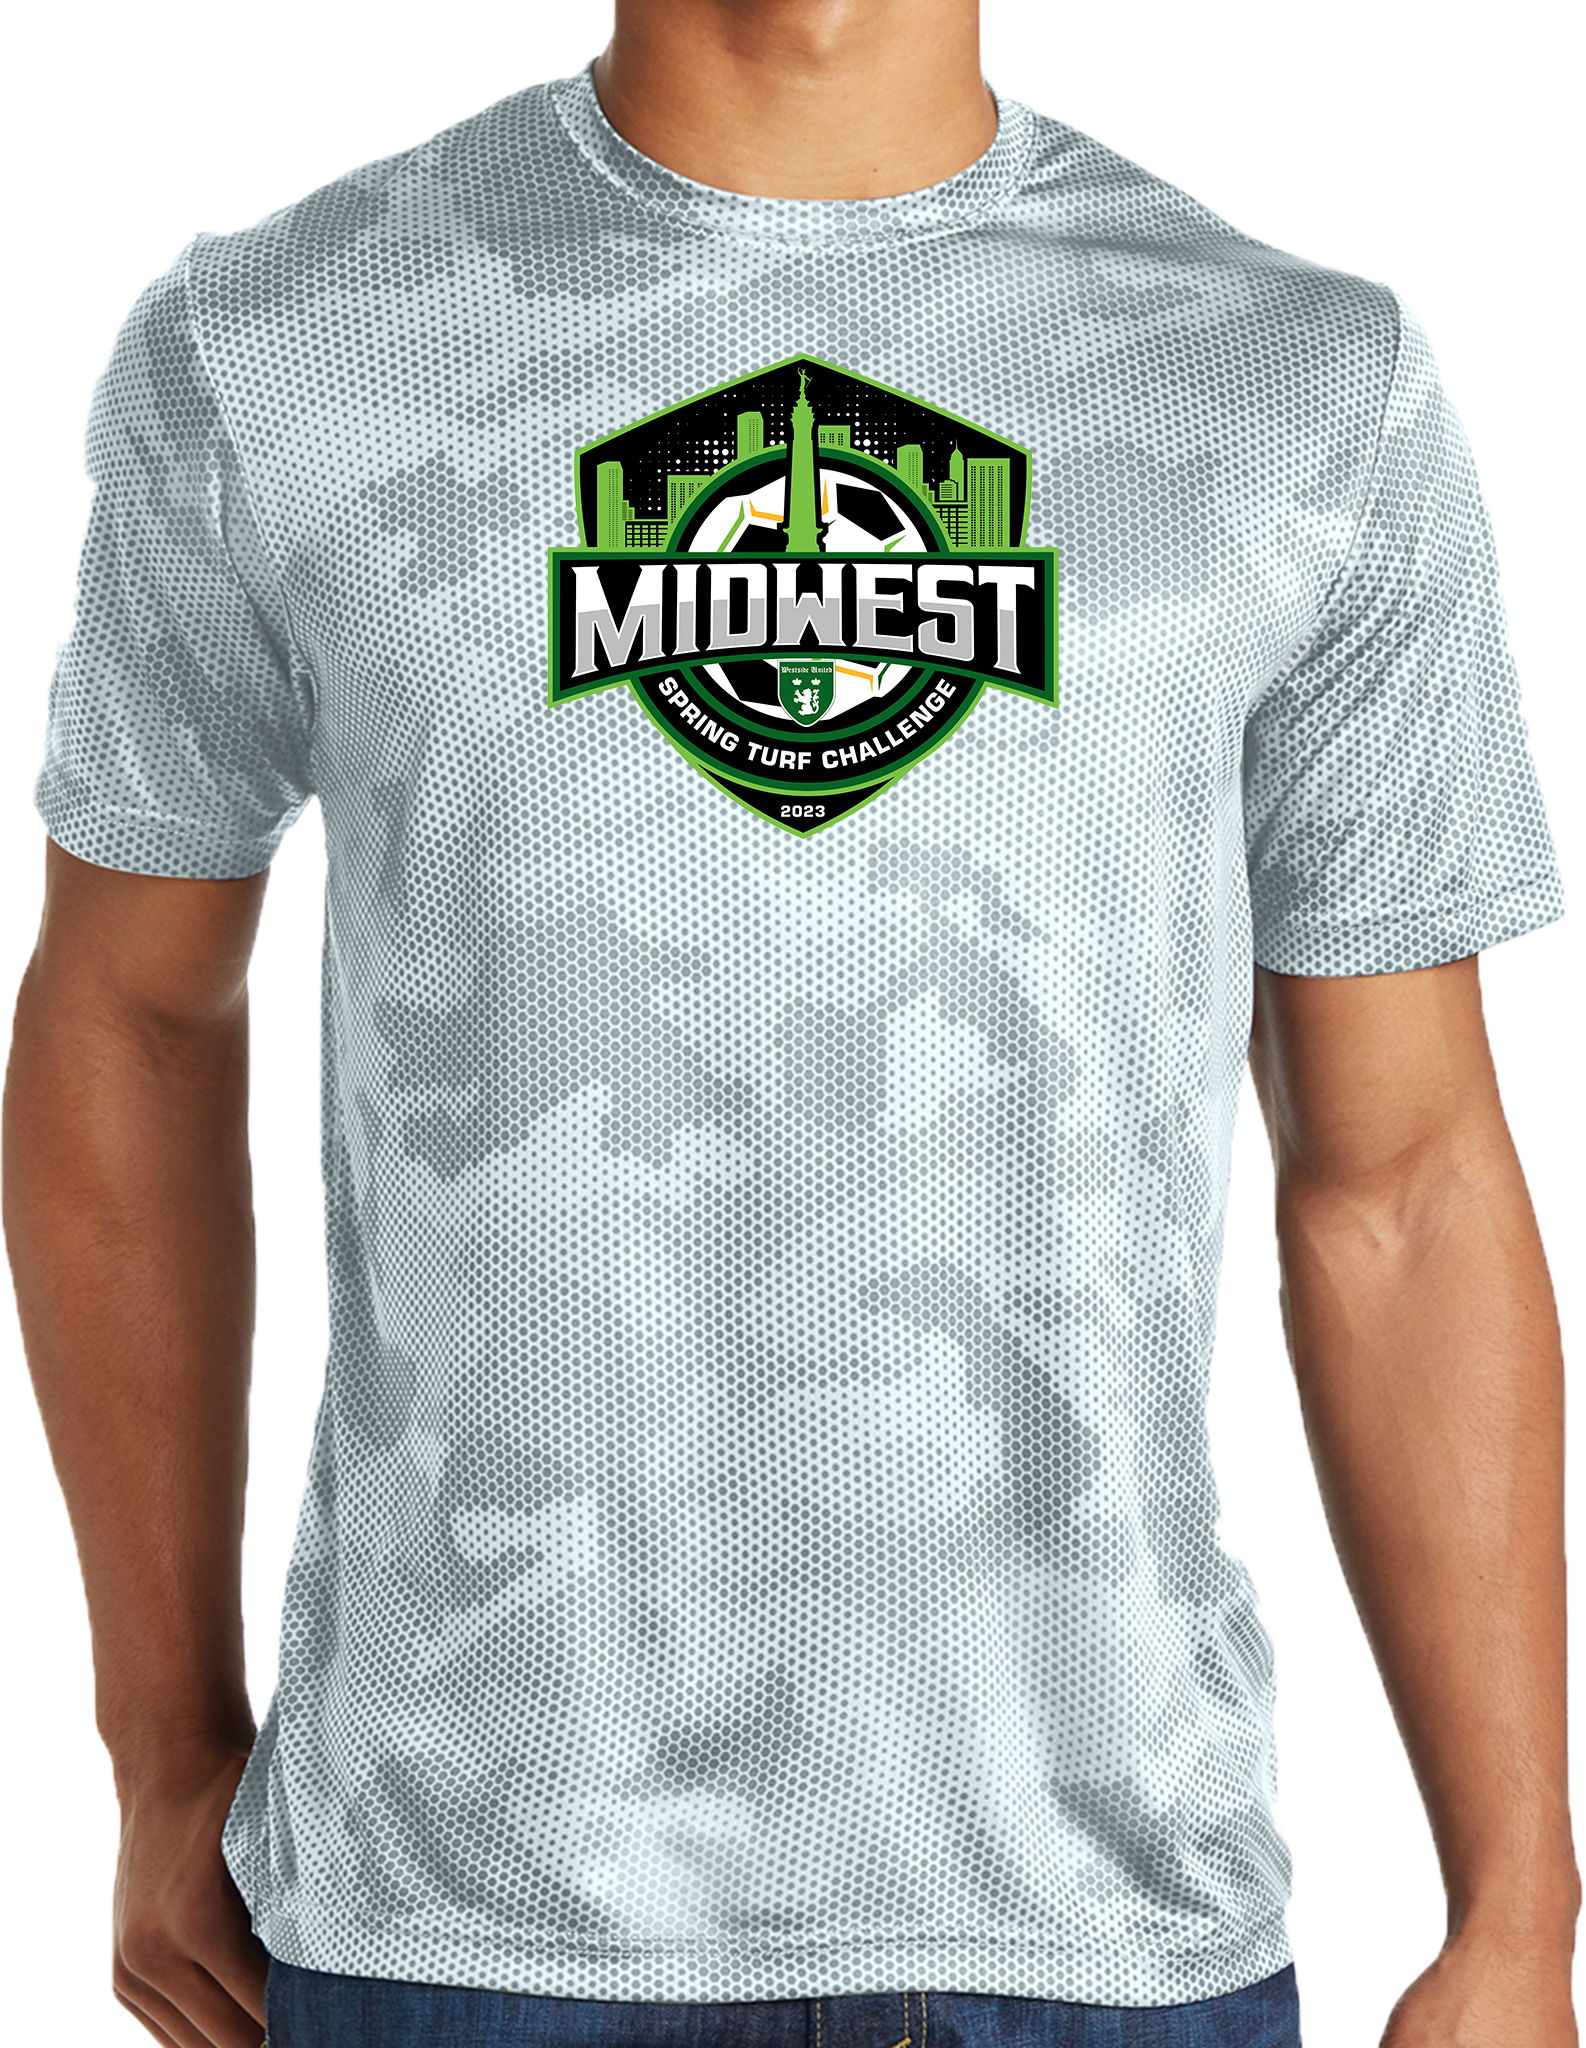 PERFORMANCE SHIRTS - 2023 Midwest Spring Turf Challenge